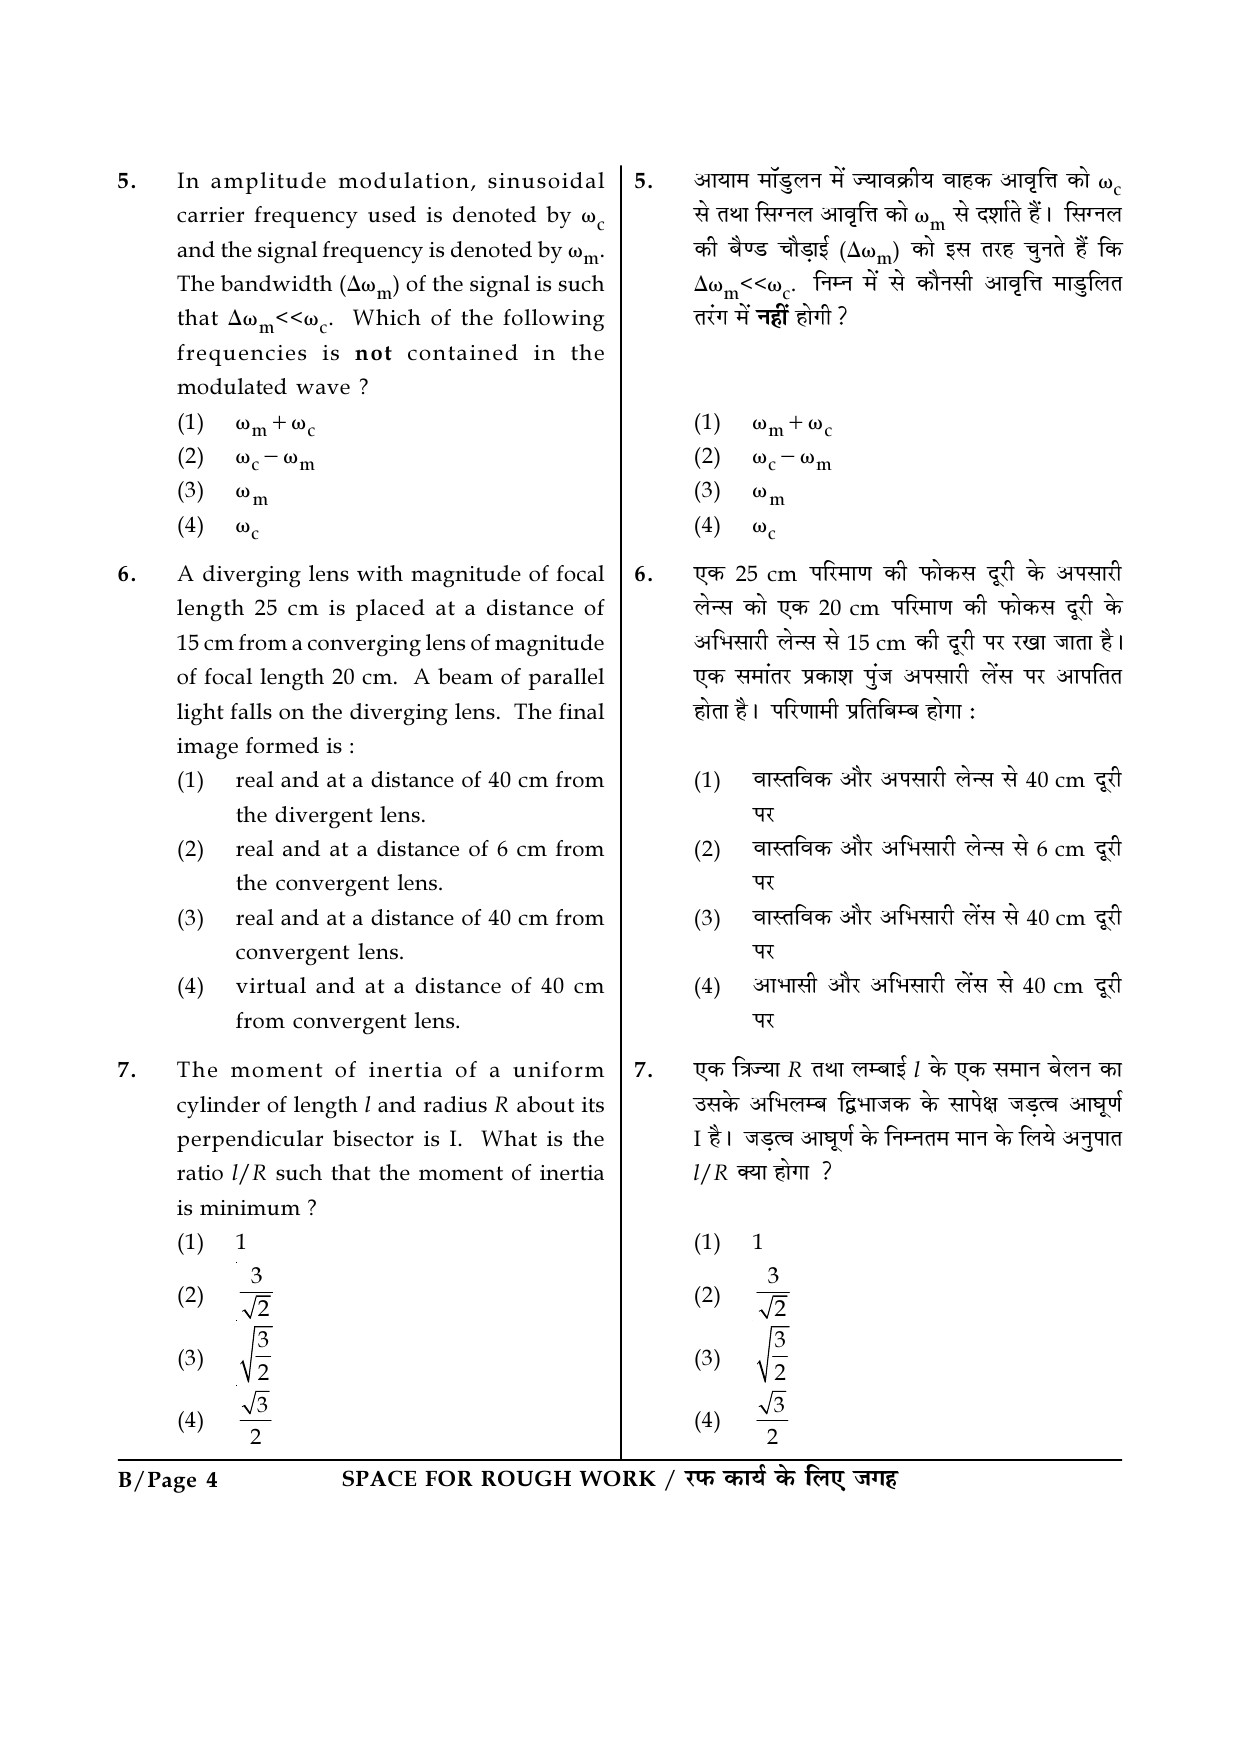 JEE Main Exam Question Paper 2017 Booklet B 4